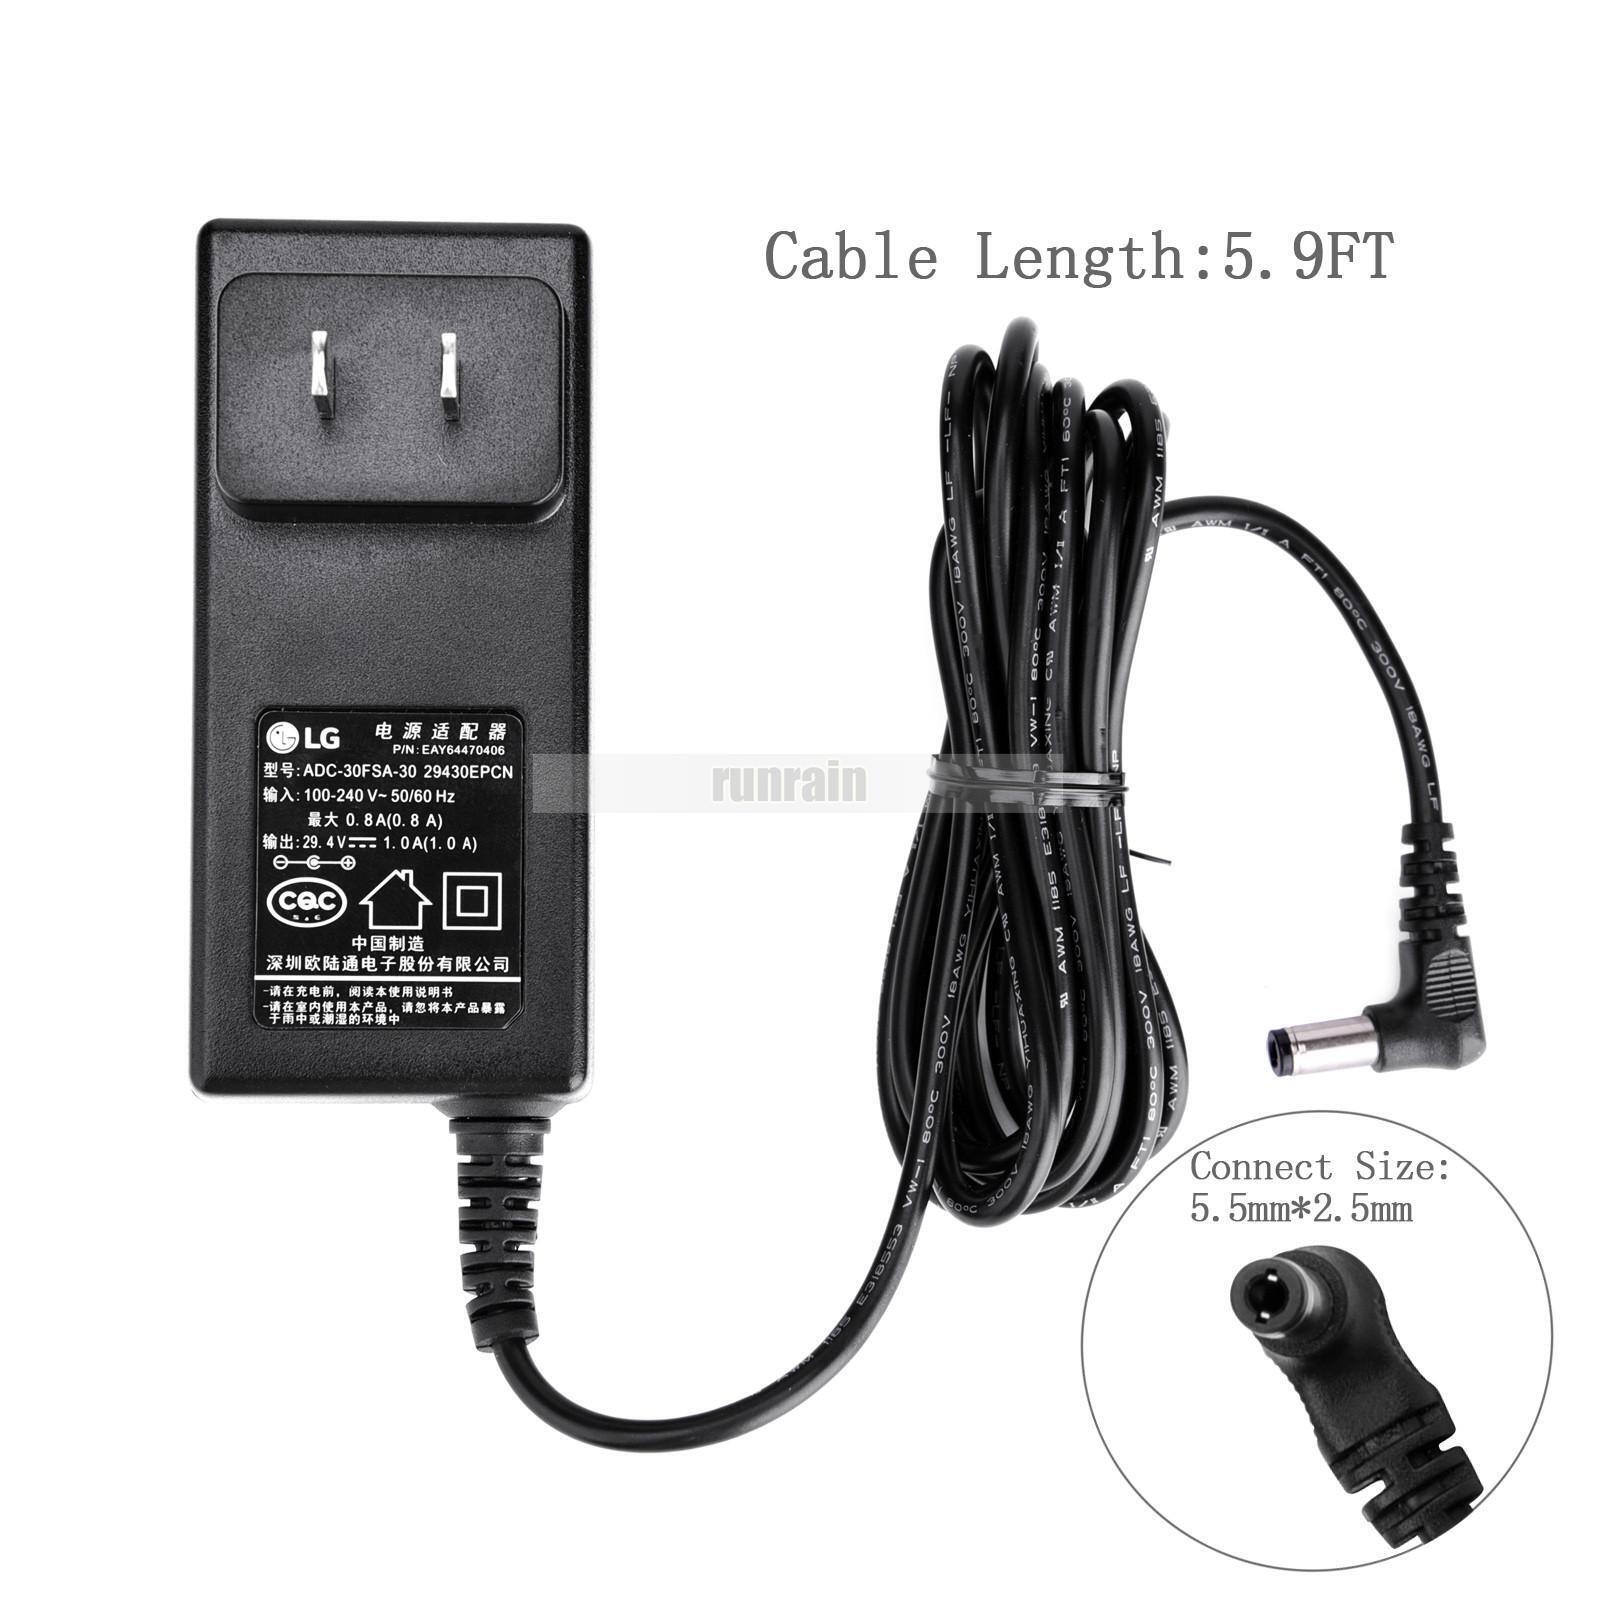 LG Vacuum Cleaners AC Adapter ADC-30FSA-30 29.4V 1A for A900BM A902RM A905RM Brand LG Color Black Compatible Brand LG C